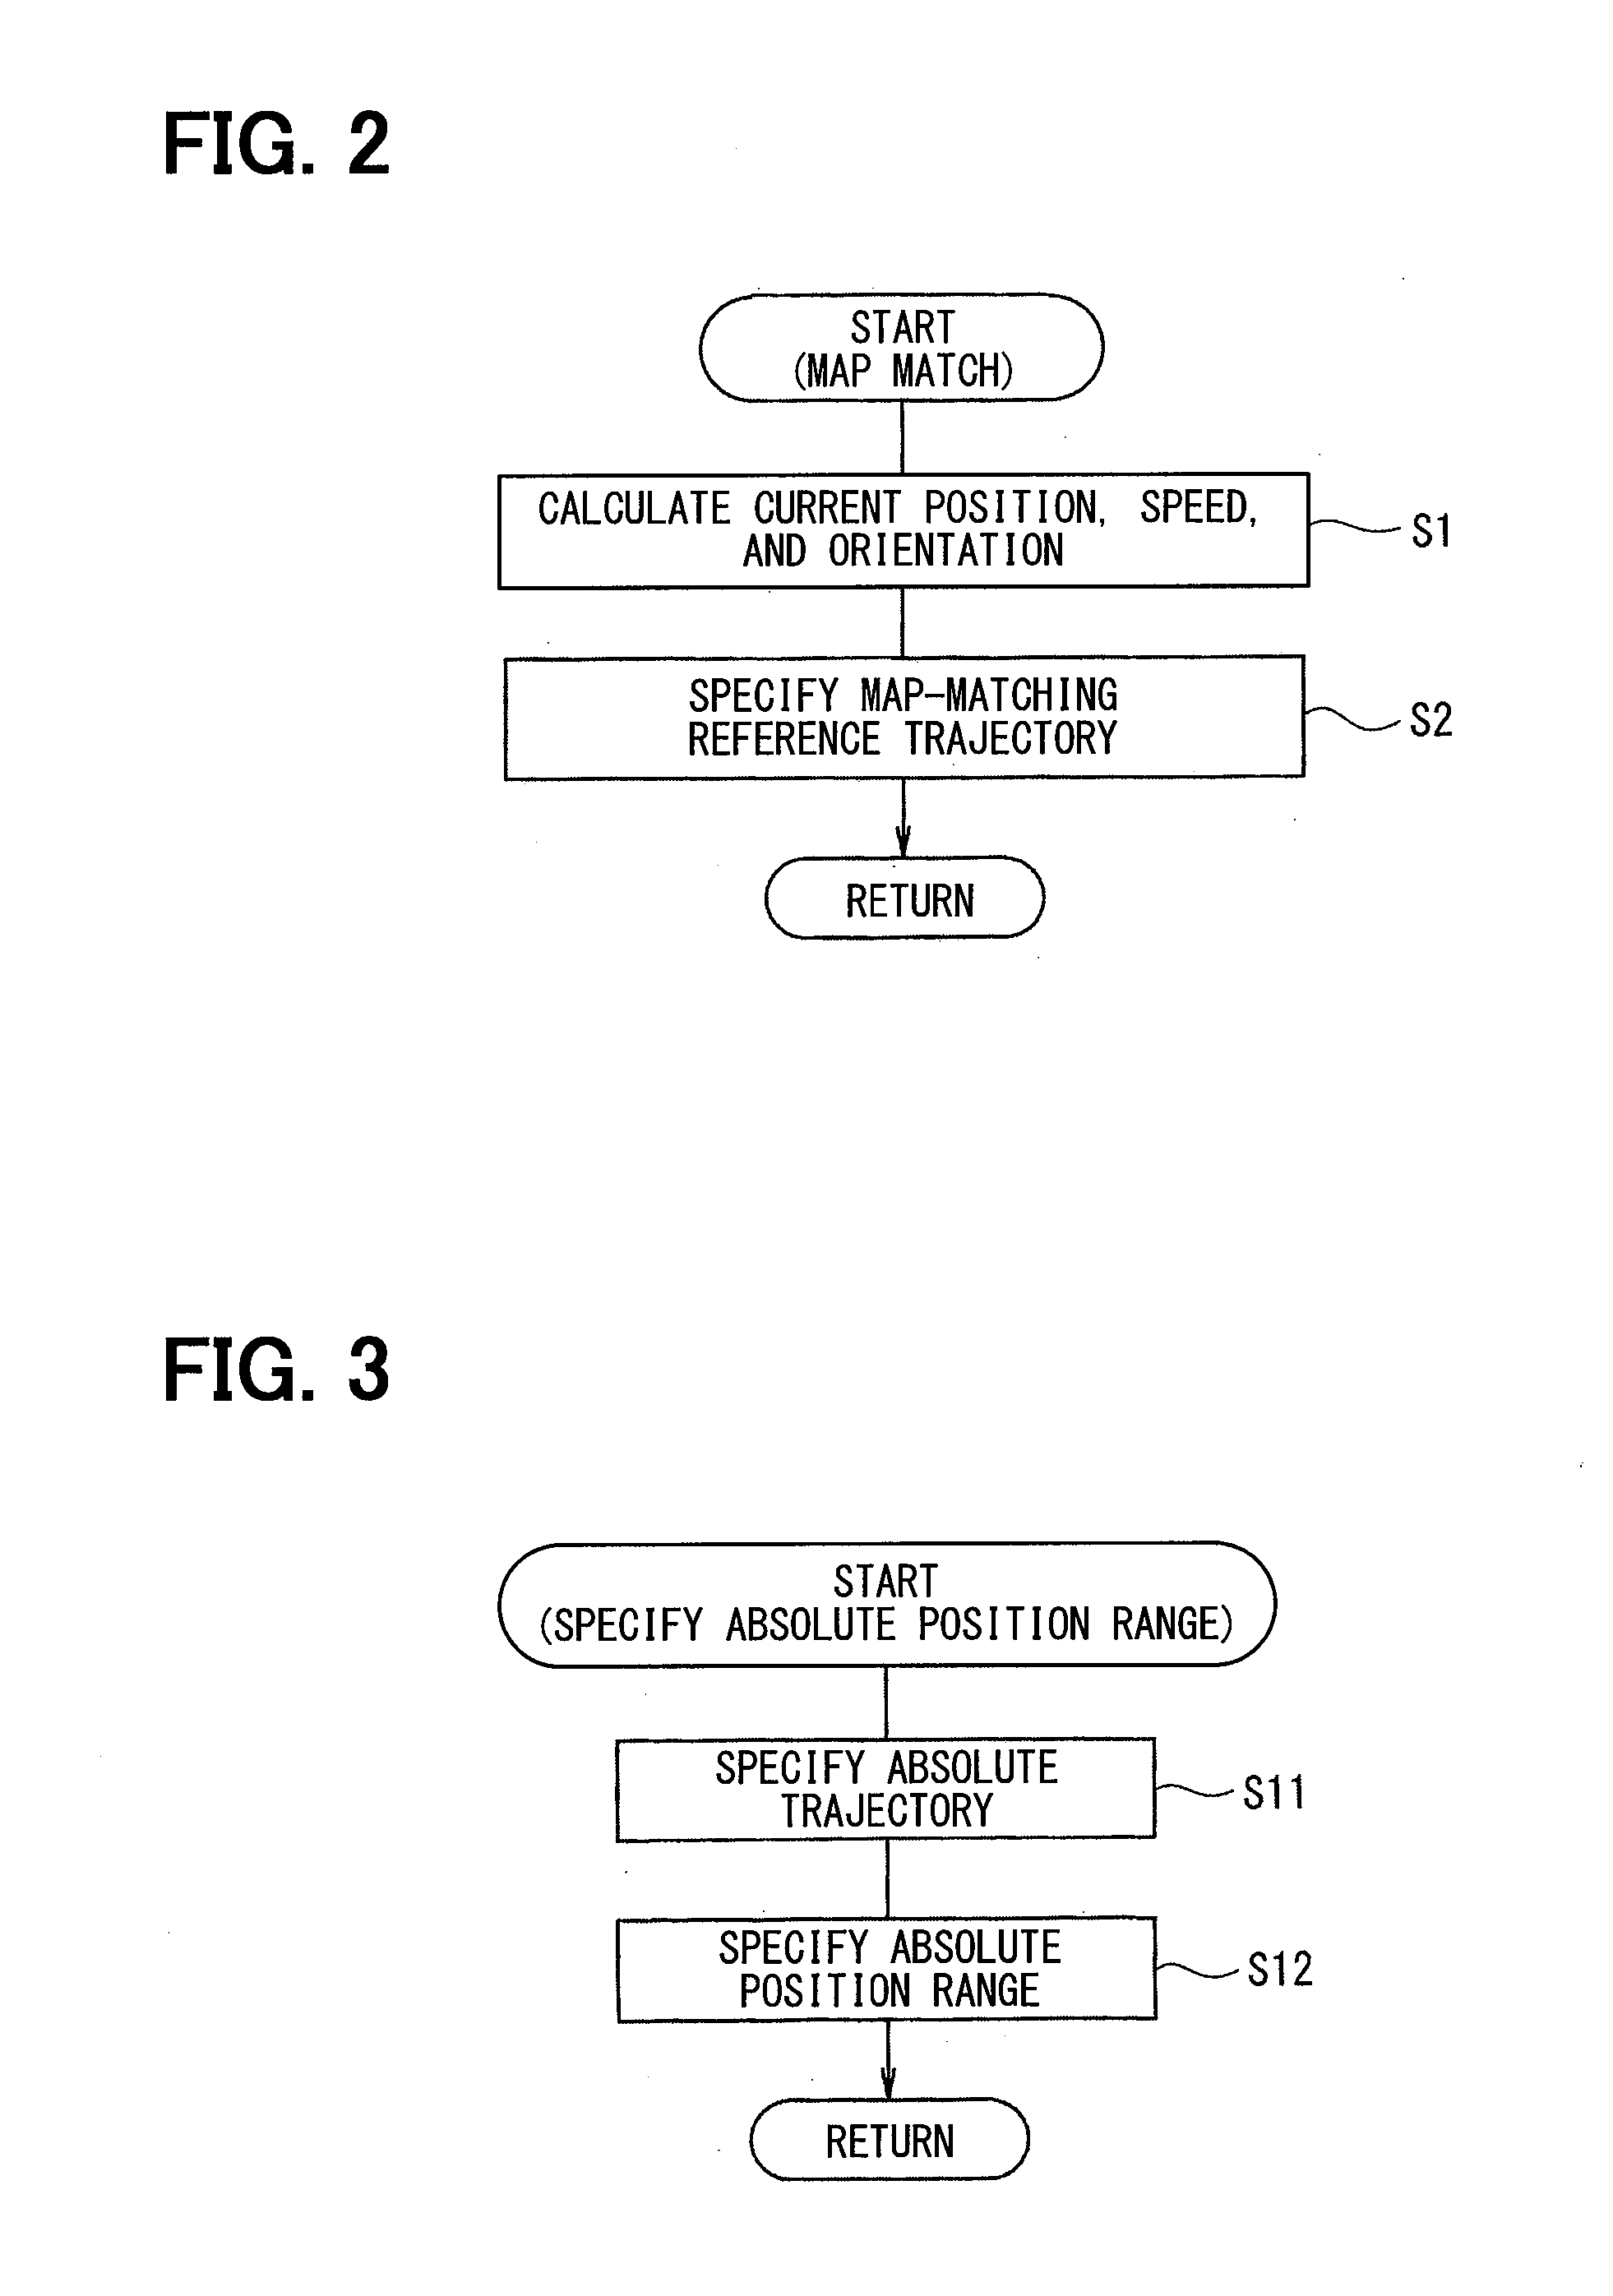 Host-vehicle-travel-position specification apparatus and host-vehicle-travel-position specification program product